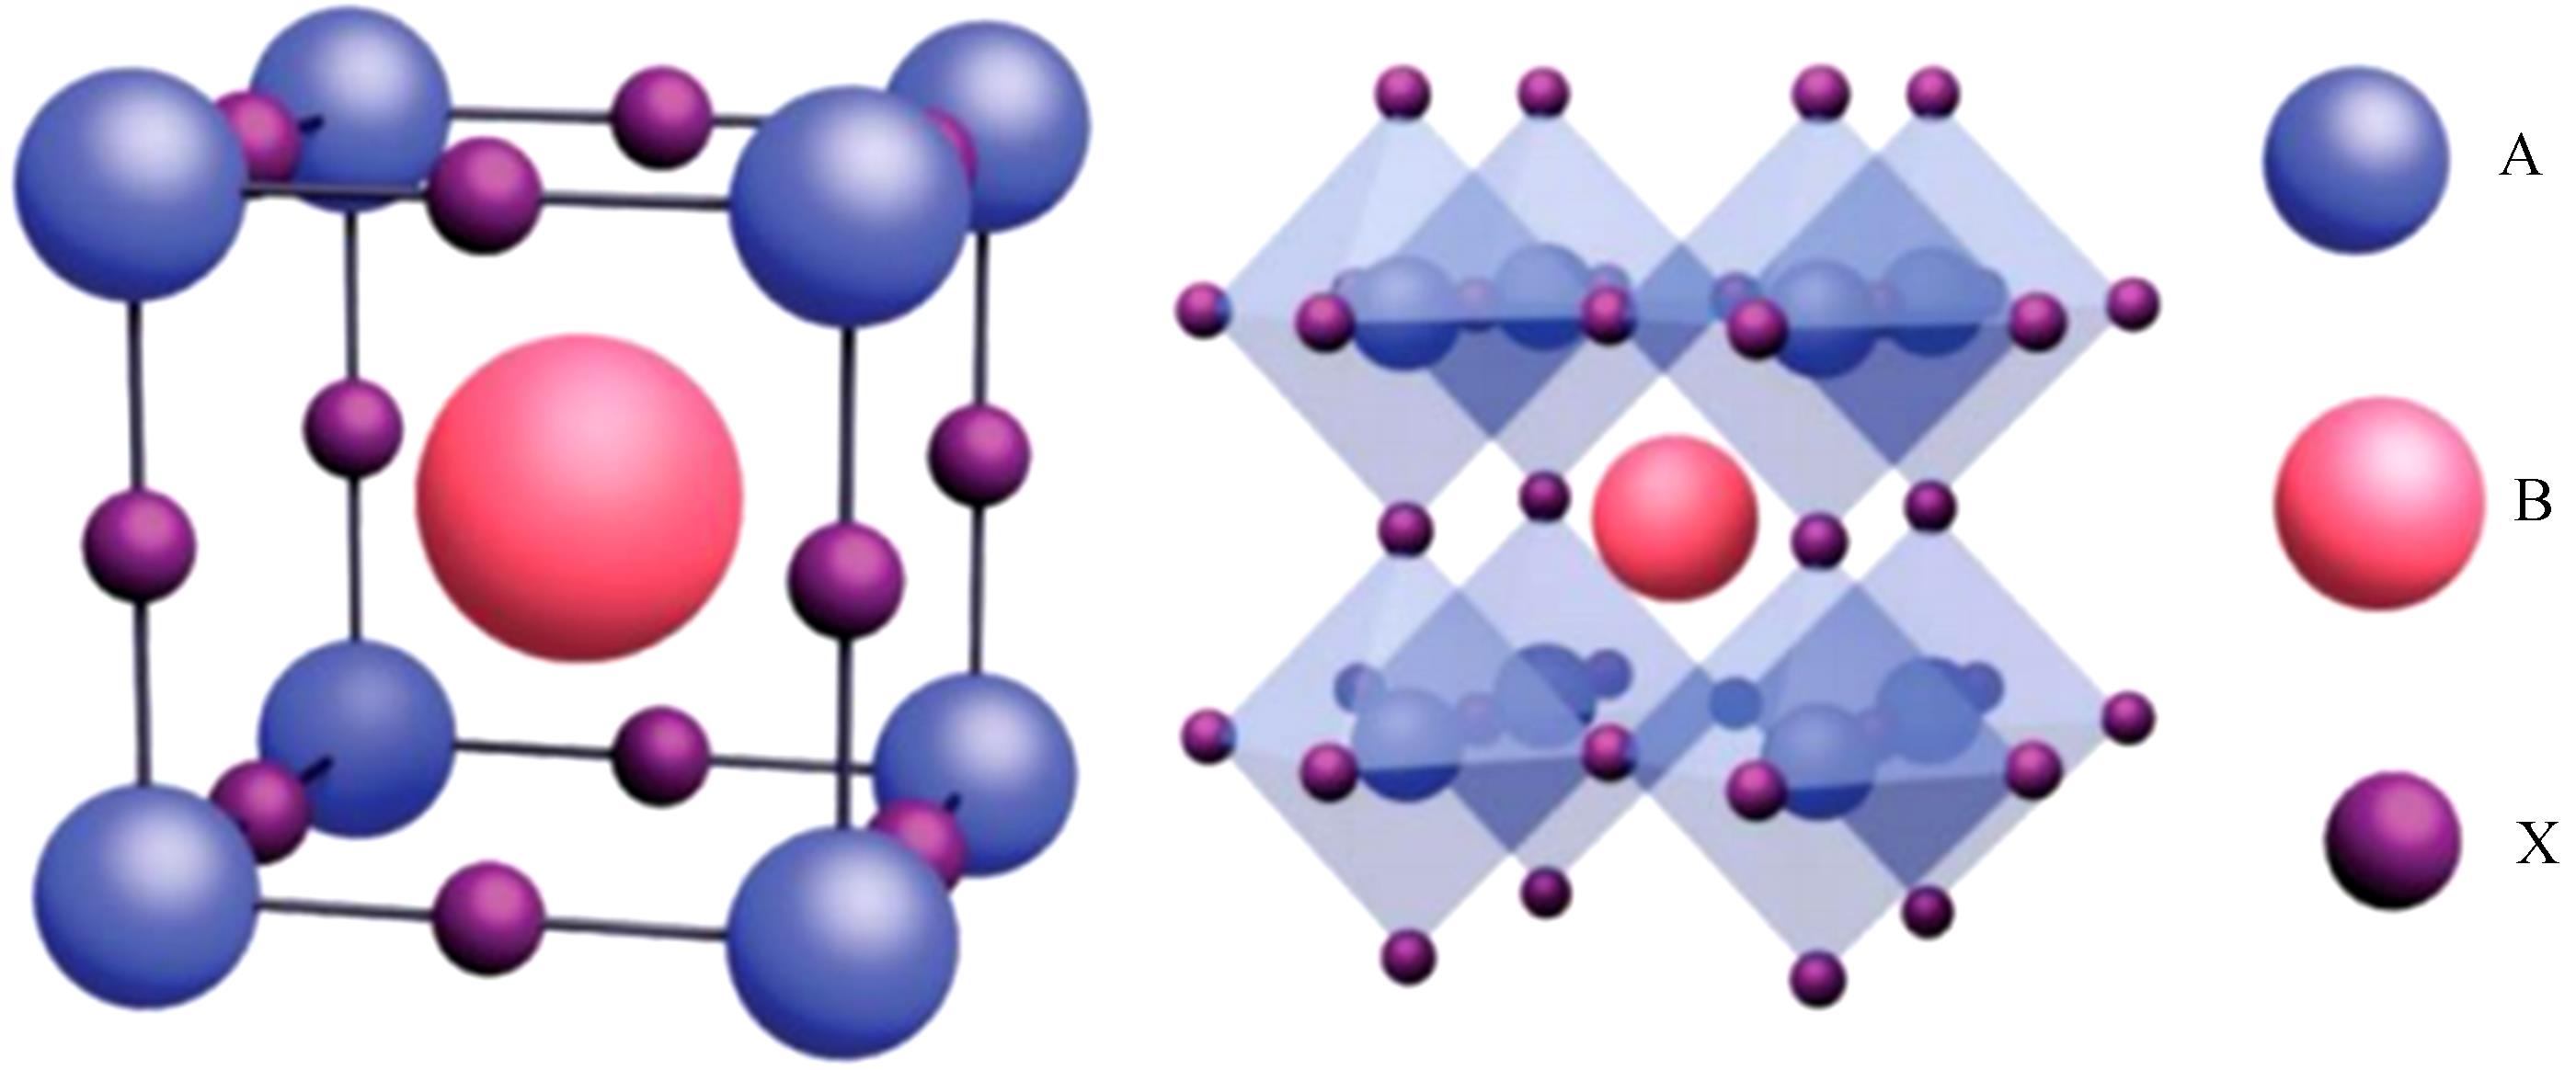 Unit cell of an ideal cubic perovskite ABX3 (left), and their extended crystalline structured connected by corner-sharing [BX6]4- octahedra (right). Reproduced with permission[5]. Copyright 2016, Wiley-VCH